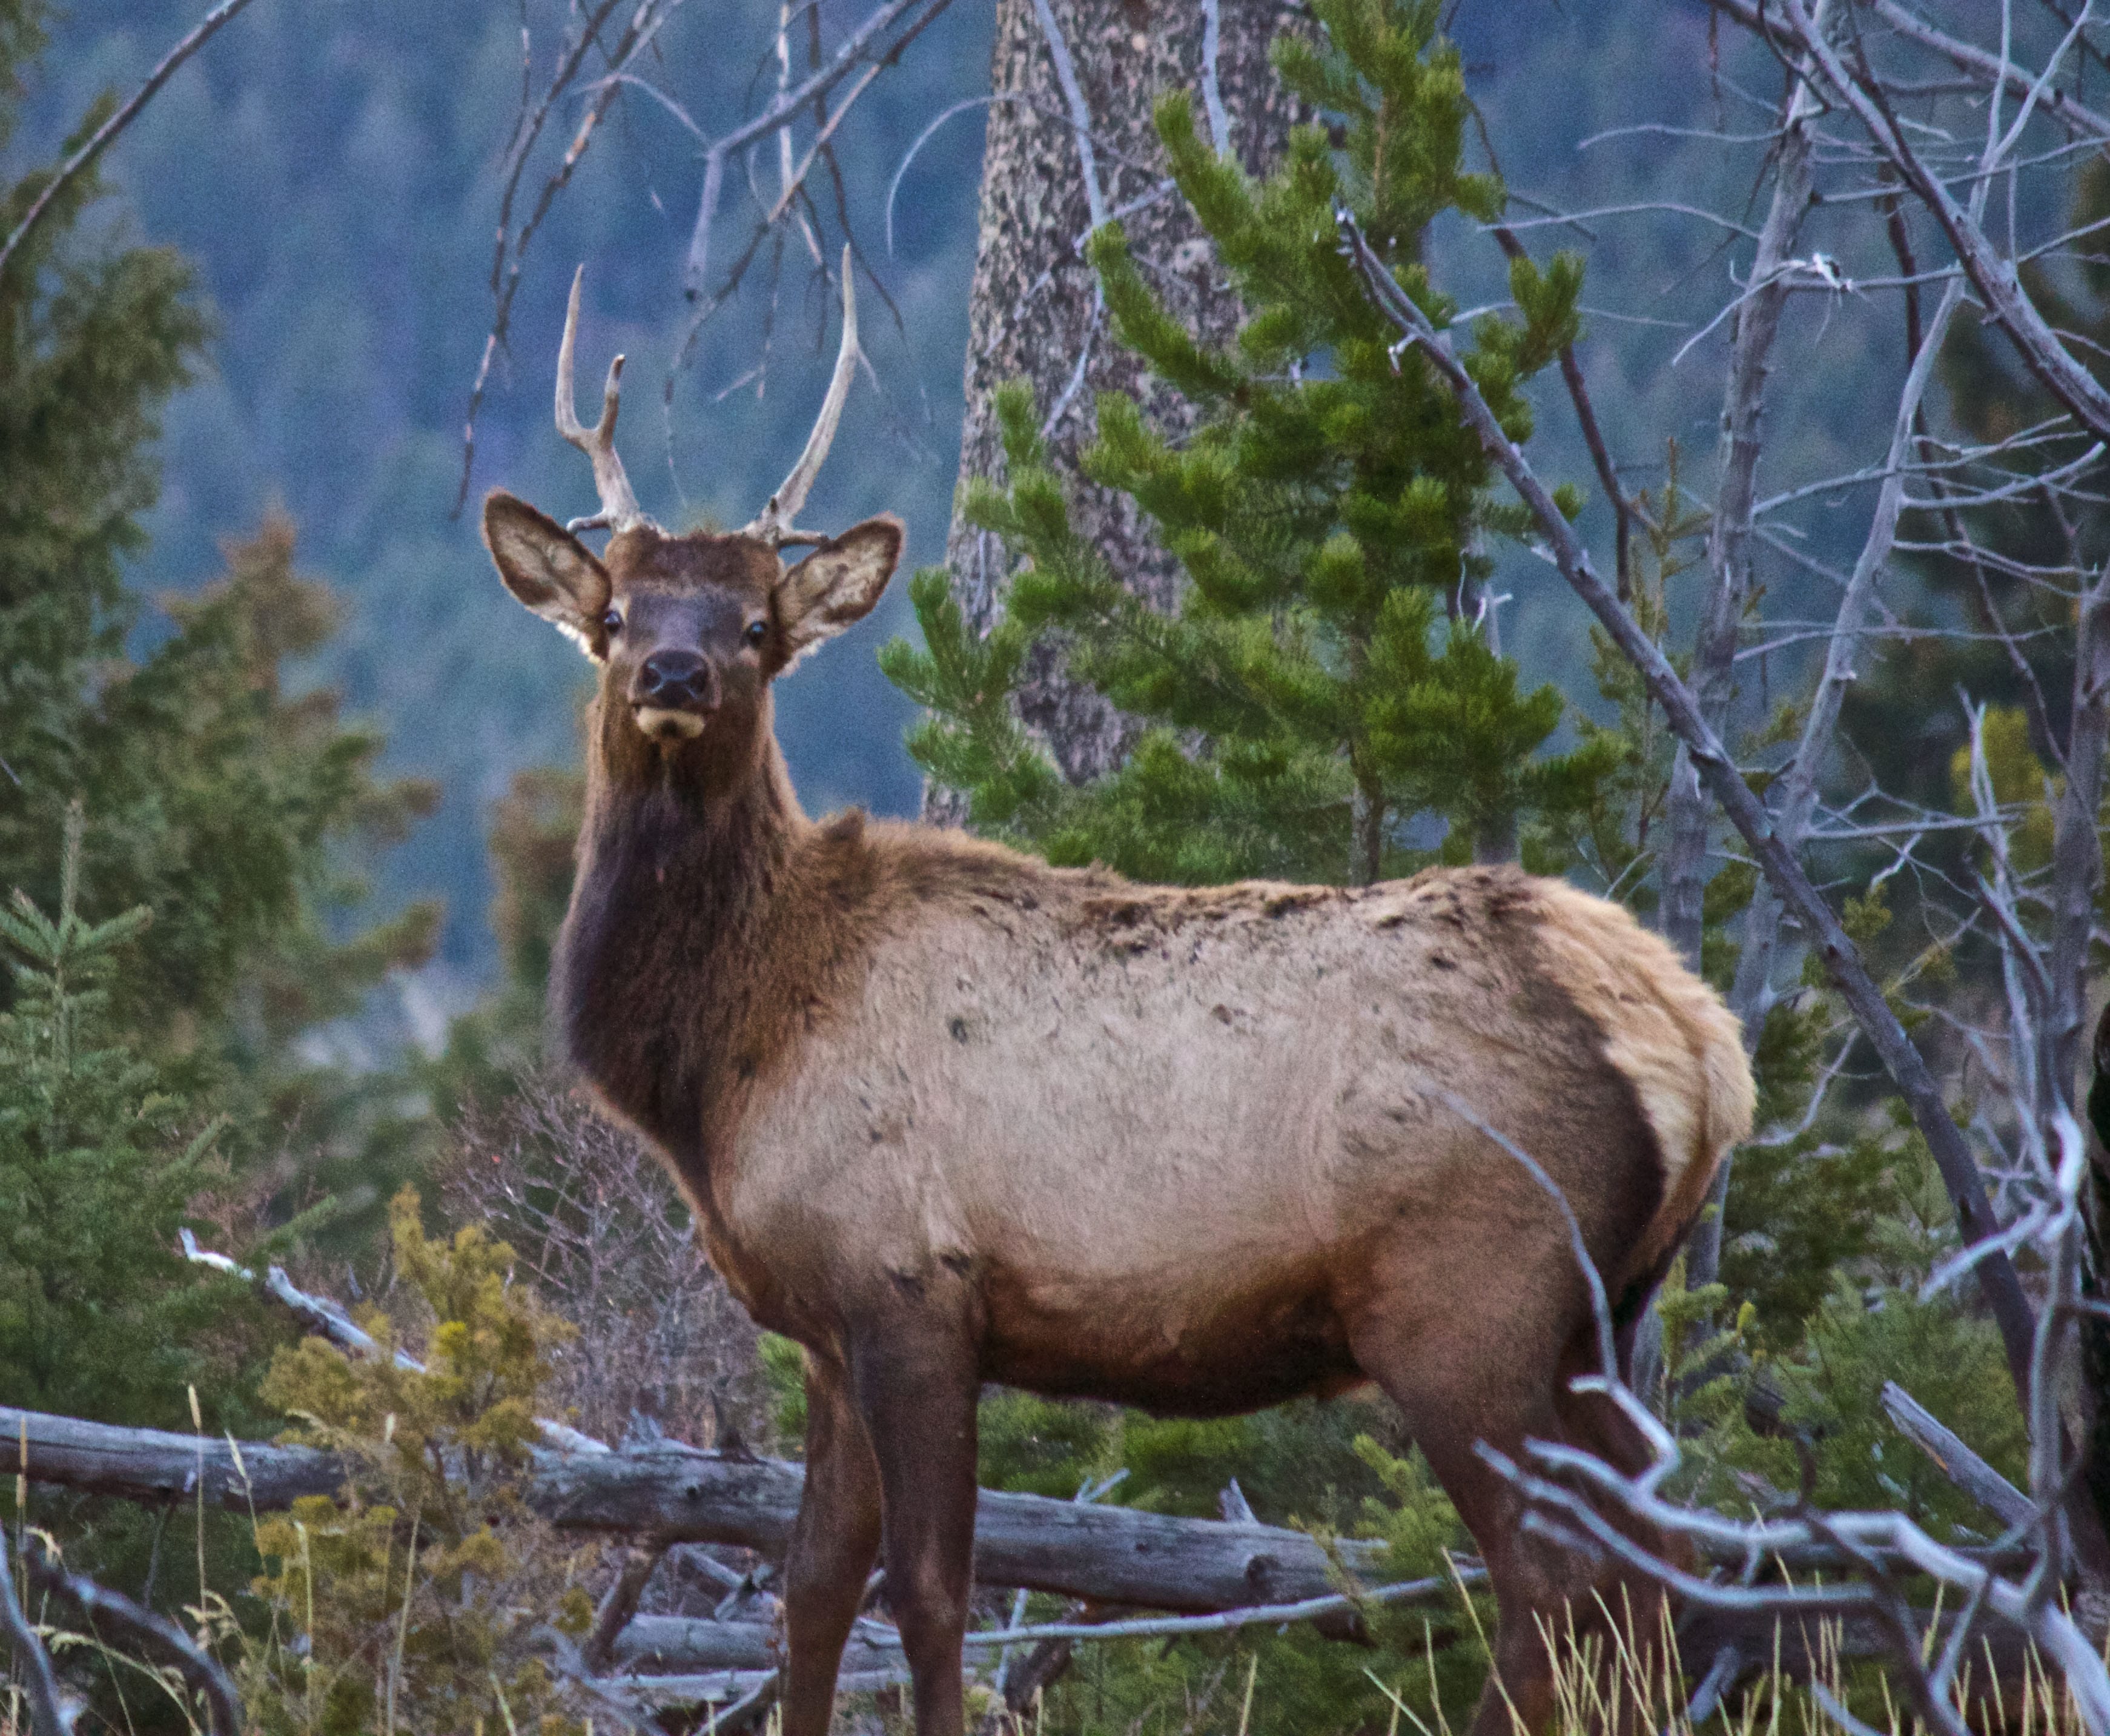 This spike bull elk would be legal game in "spike-only" hunting areas of Washington because one side of the antlers has only one point. The eye guard point on its left antler is not counted because it's less than 4 inches above the skull.